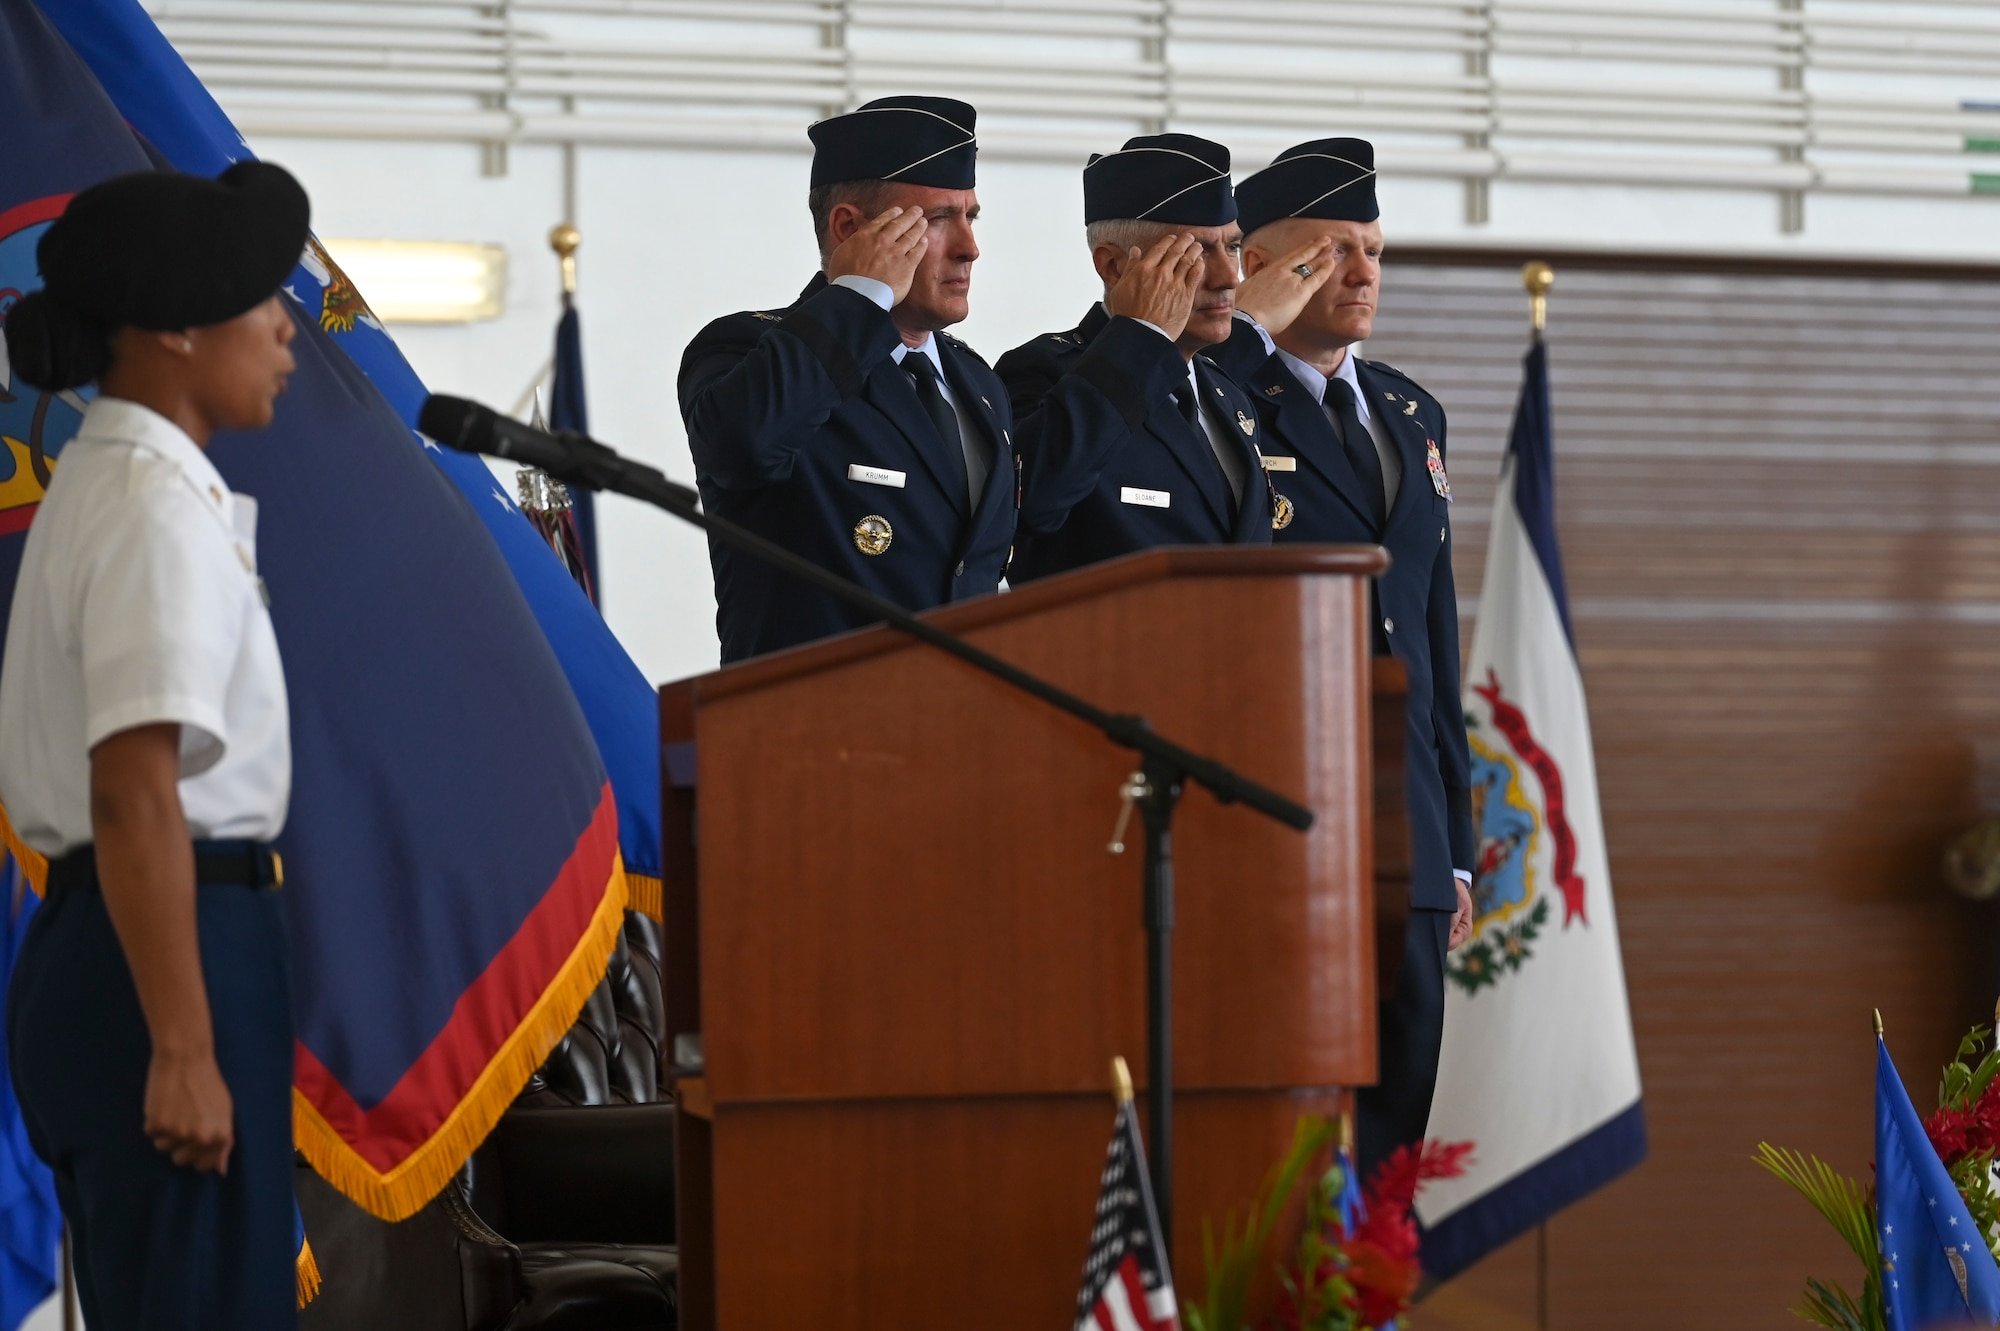 U.S. Air Force Lt. Gen. David A. Krumm, Brig. Gen. Jeremy T. Sloane, and Brig. Gen. Paul R. Birch, salute as the National Anthem is sung at a change of command ceremony June 10, 2022, at Andersen Air Force Base, Guam.